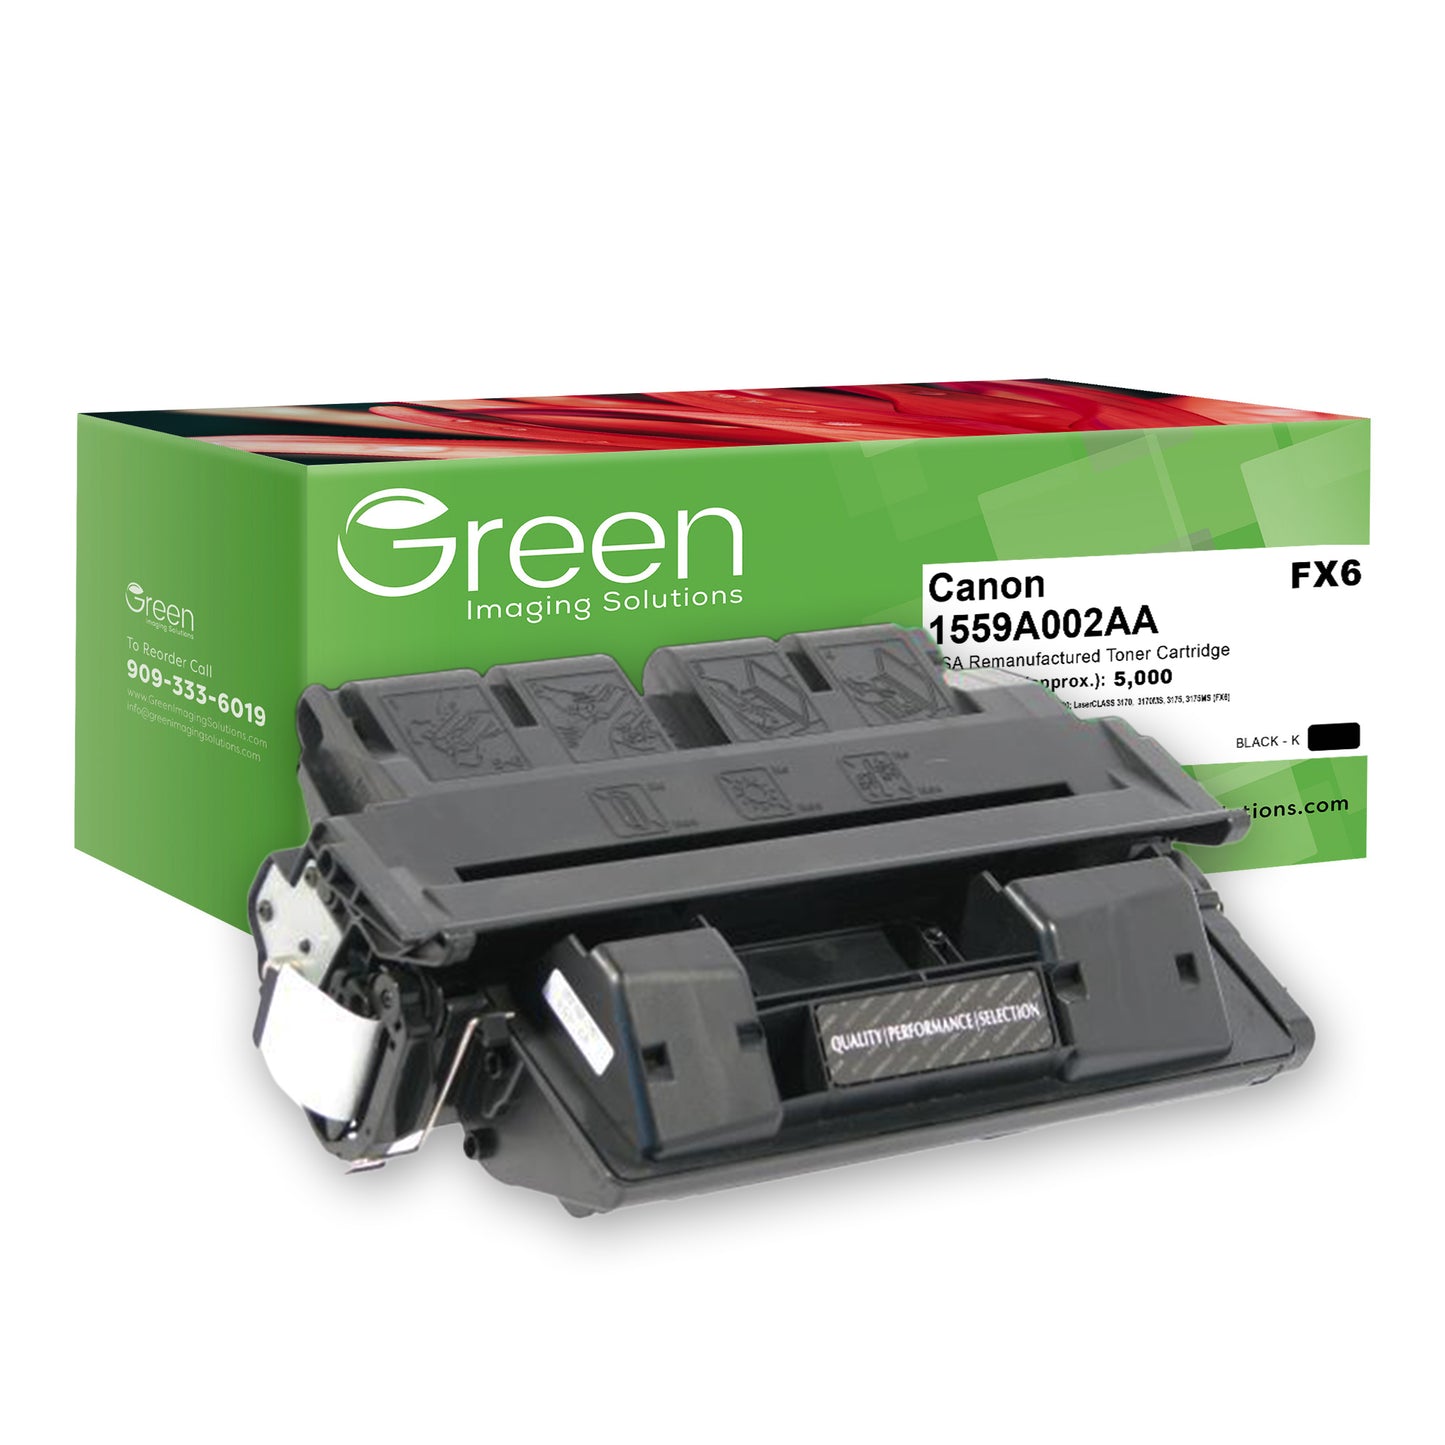 Green Imaging Solutions USA Remanufactured Toner Cartridge for Canon 1559A002AA (FX6)